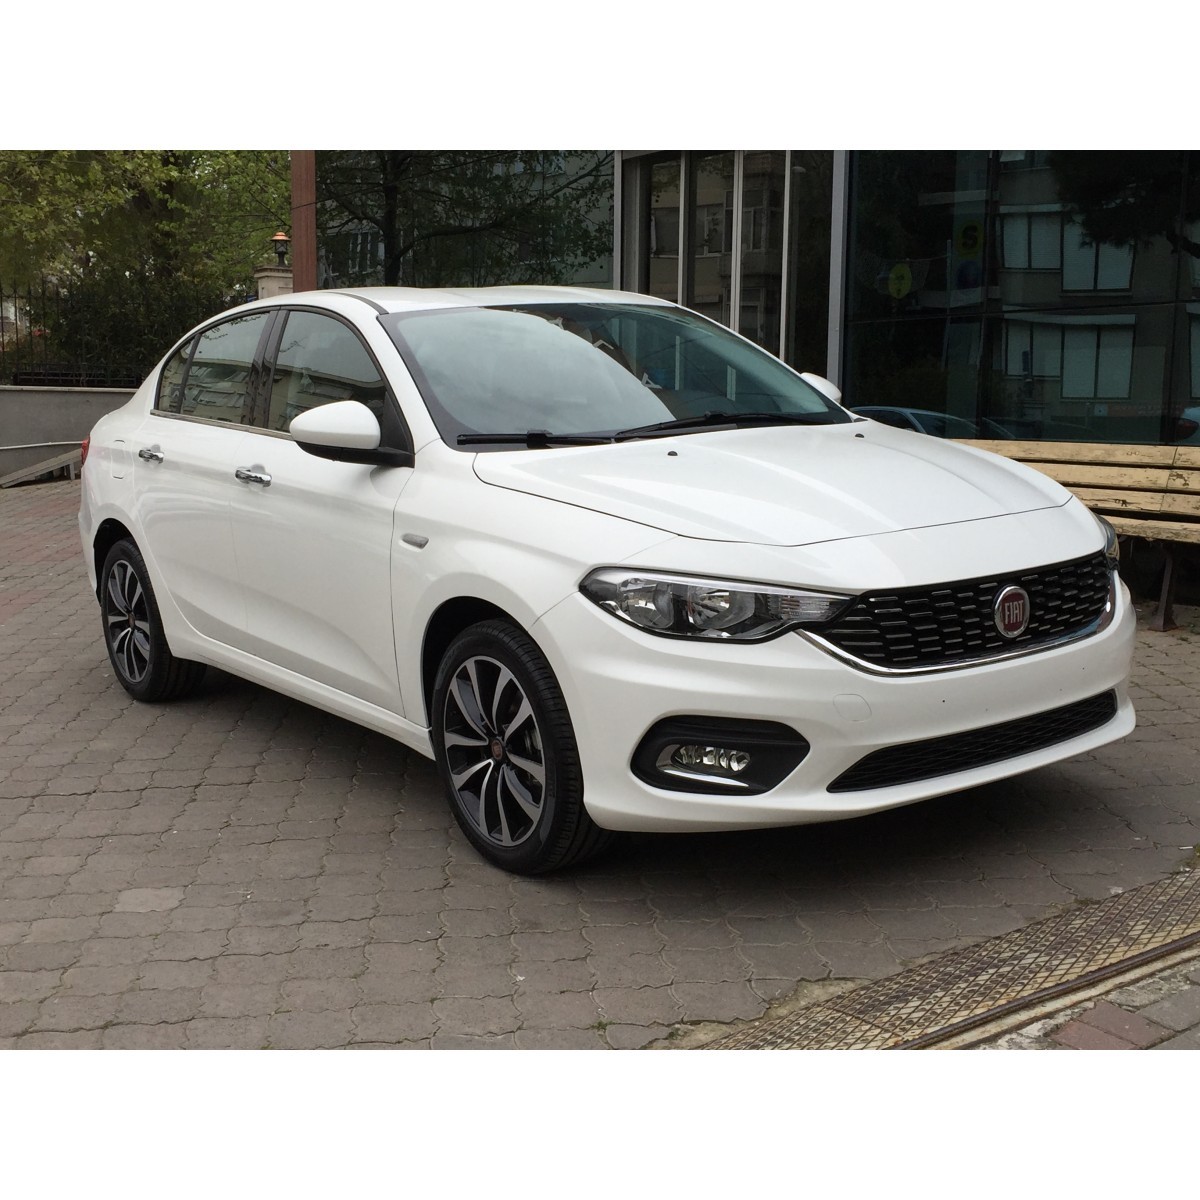 <span style="font-weight: bold;">Fiat Egea</span>